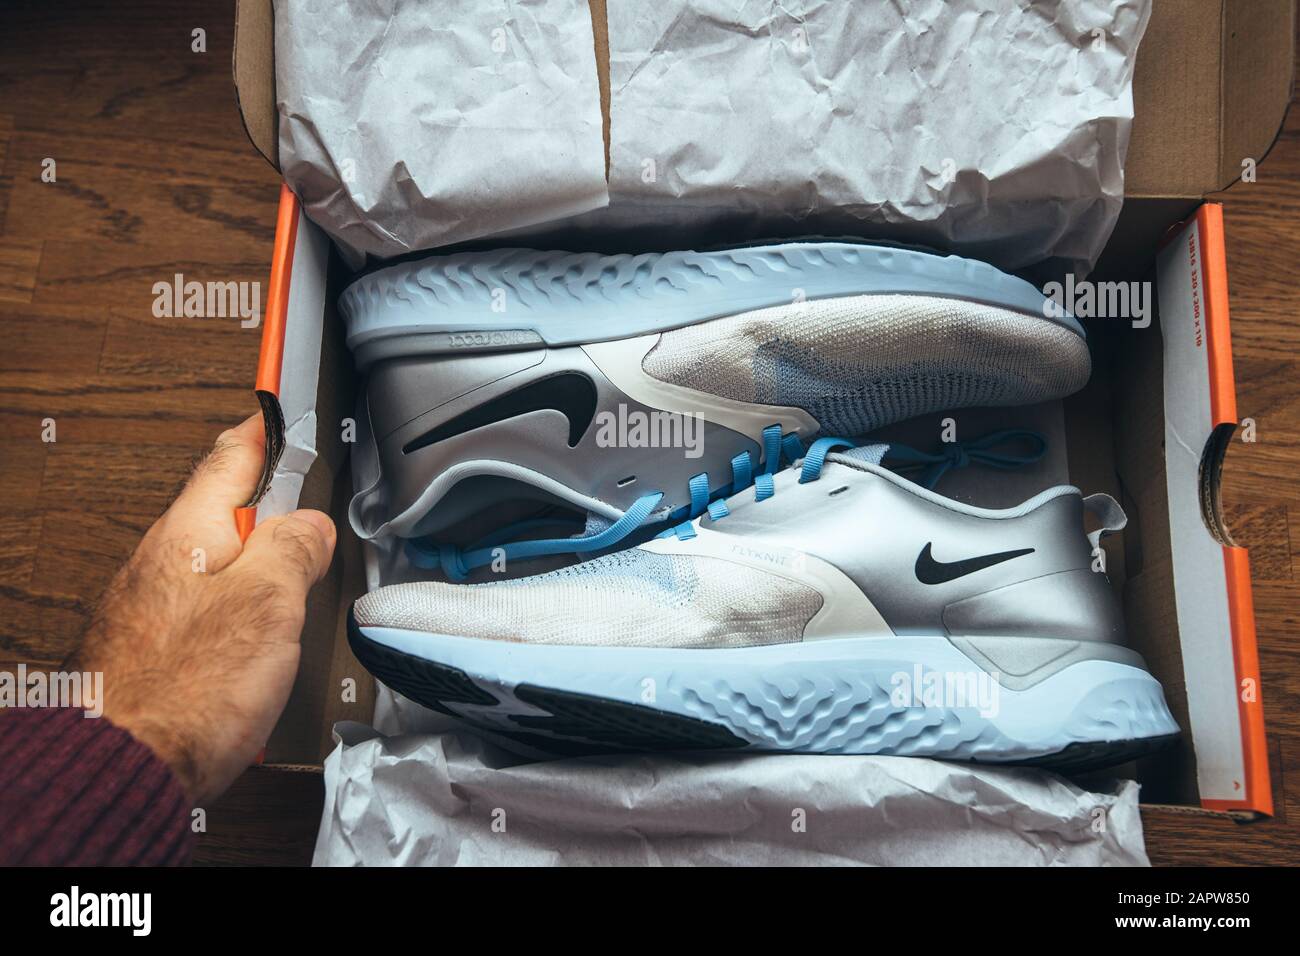 Paris, France - Sep 23, 2019: Personal perspective Unboxing unpacking on  wooden table pair of new Nike female running professional shoes Nike  Odyssey Reakt 2 Flyknit PRM Stock Photo - Alamy